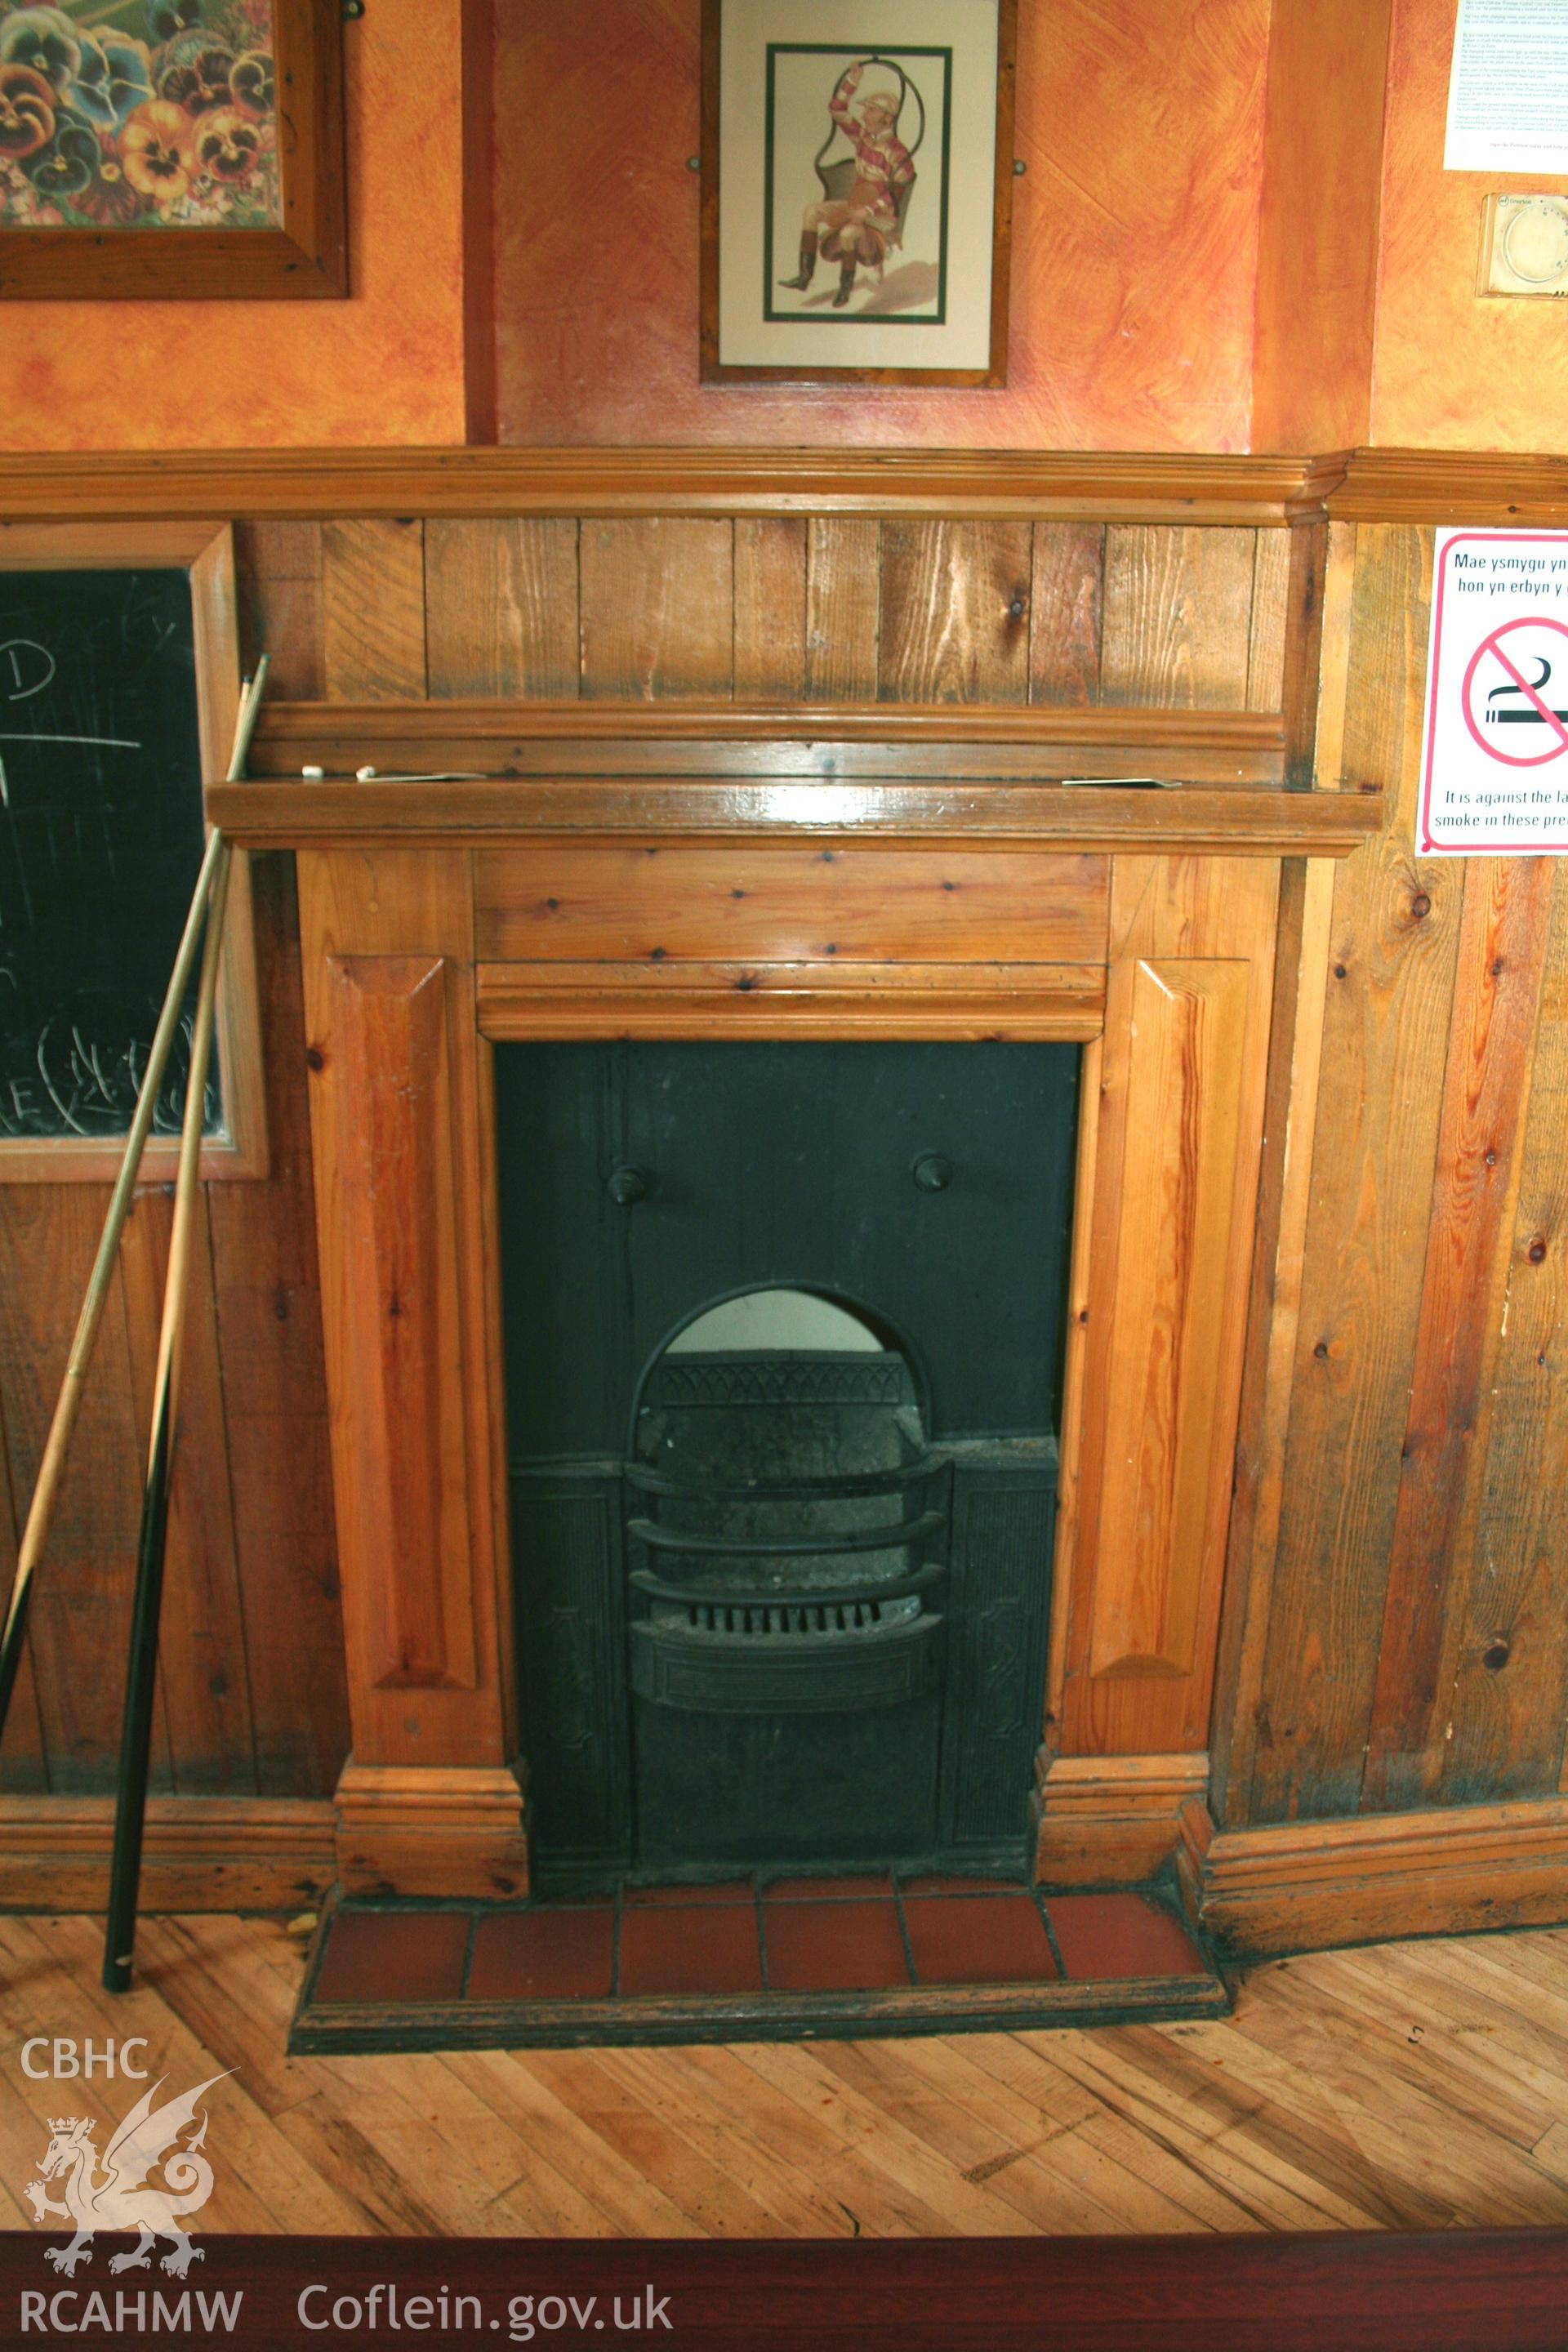 Turf Hotel, Mold Road, Wrexham. Interior, fireplace in rear-room.